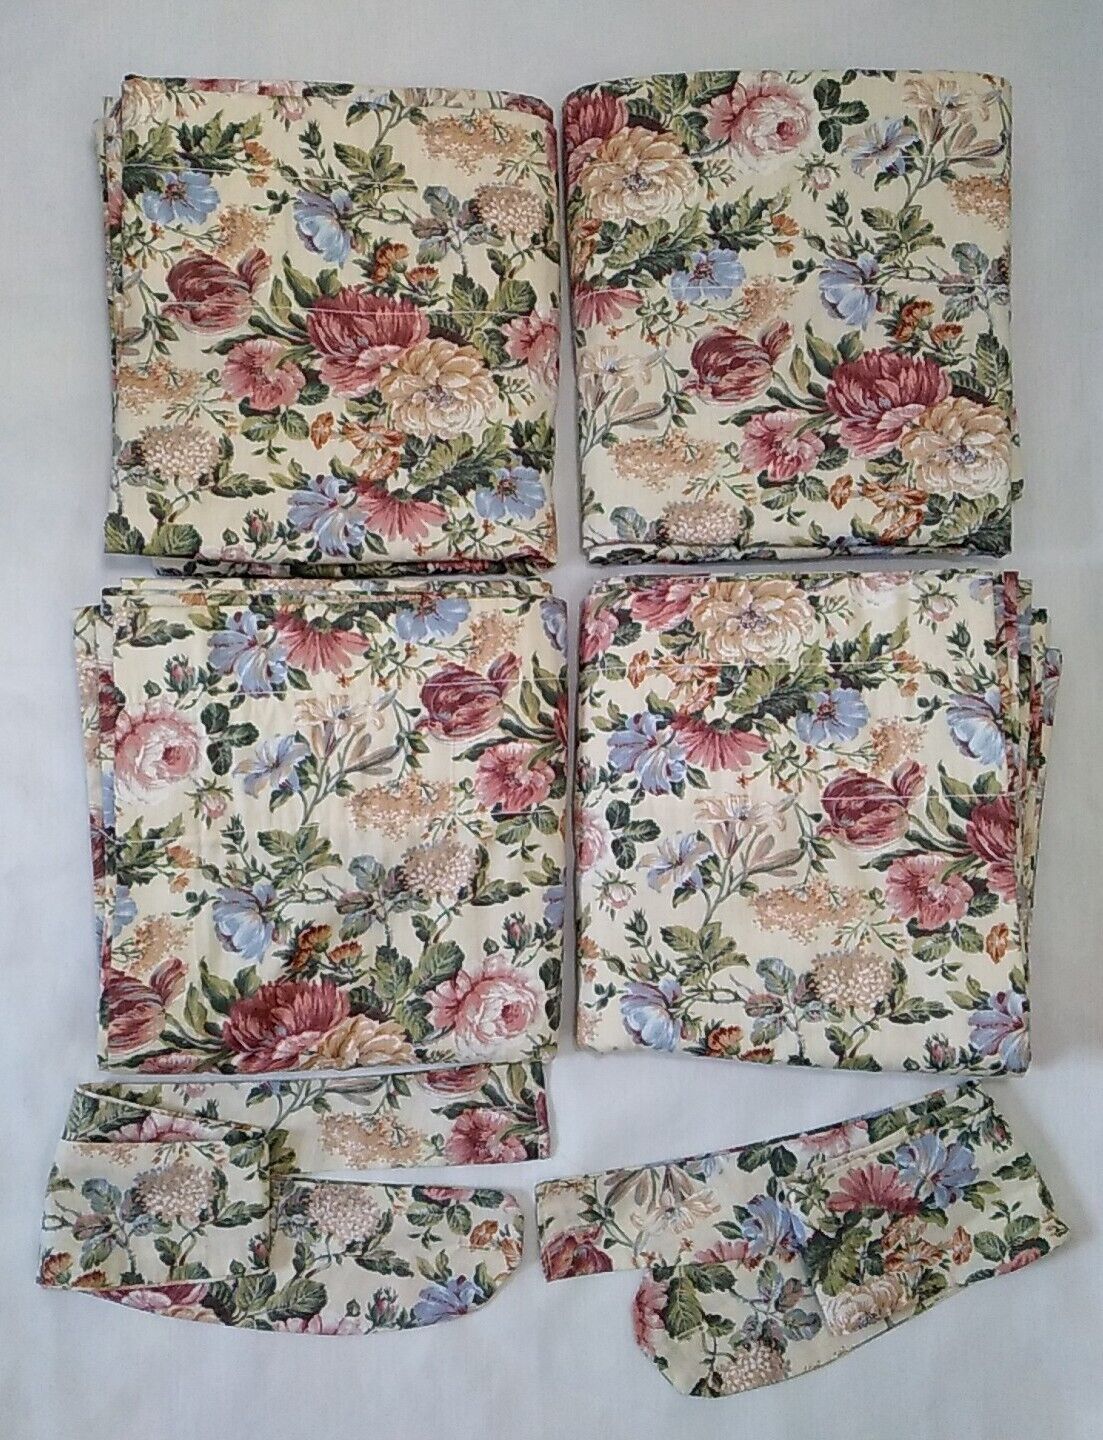 VTG Drapes 4 Panels 2 Tiebacks Multicolor Floral Lined Weighted Corners Neutral